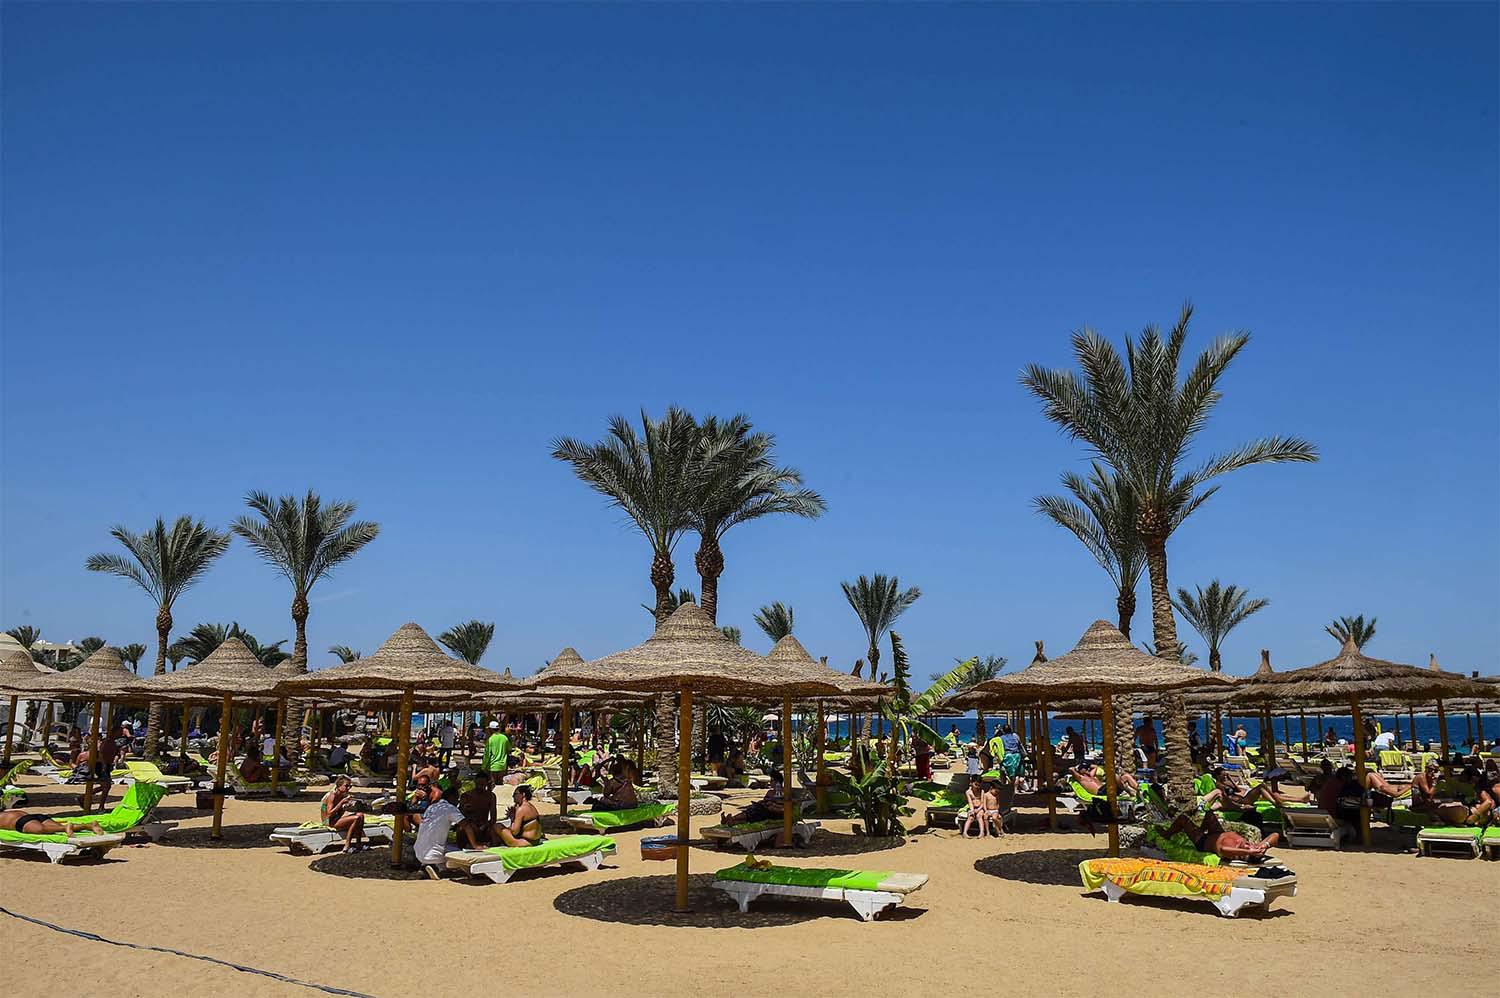 Tourists sunbathe on a beach in Egypt's Red Sea resort town of Hurghada on APril 2019